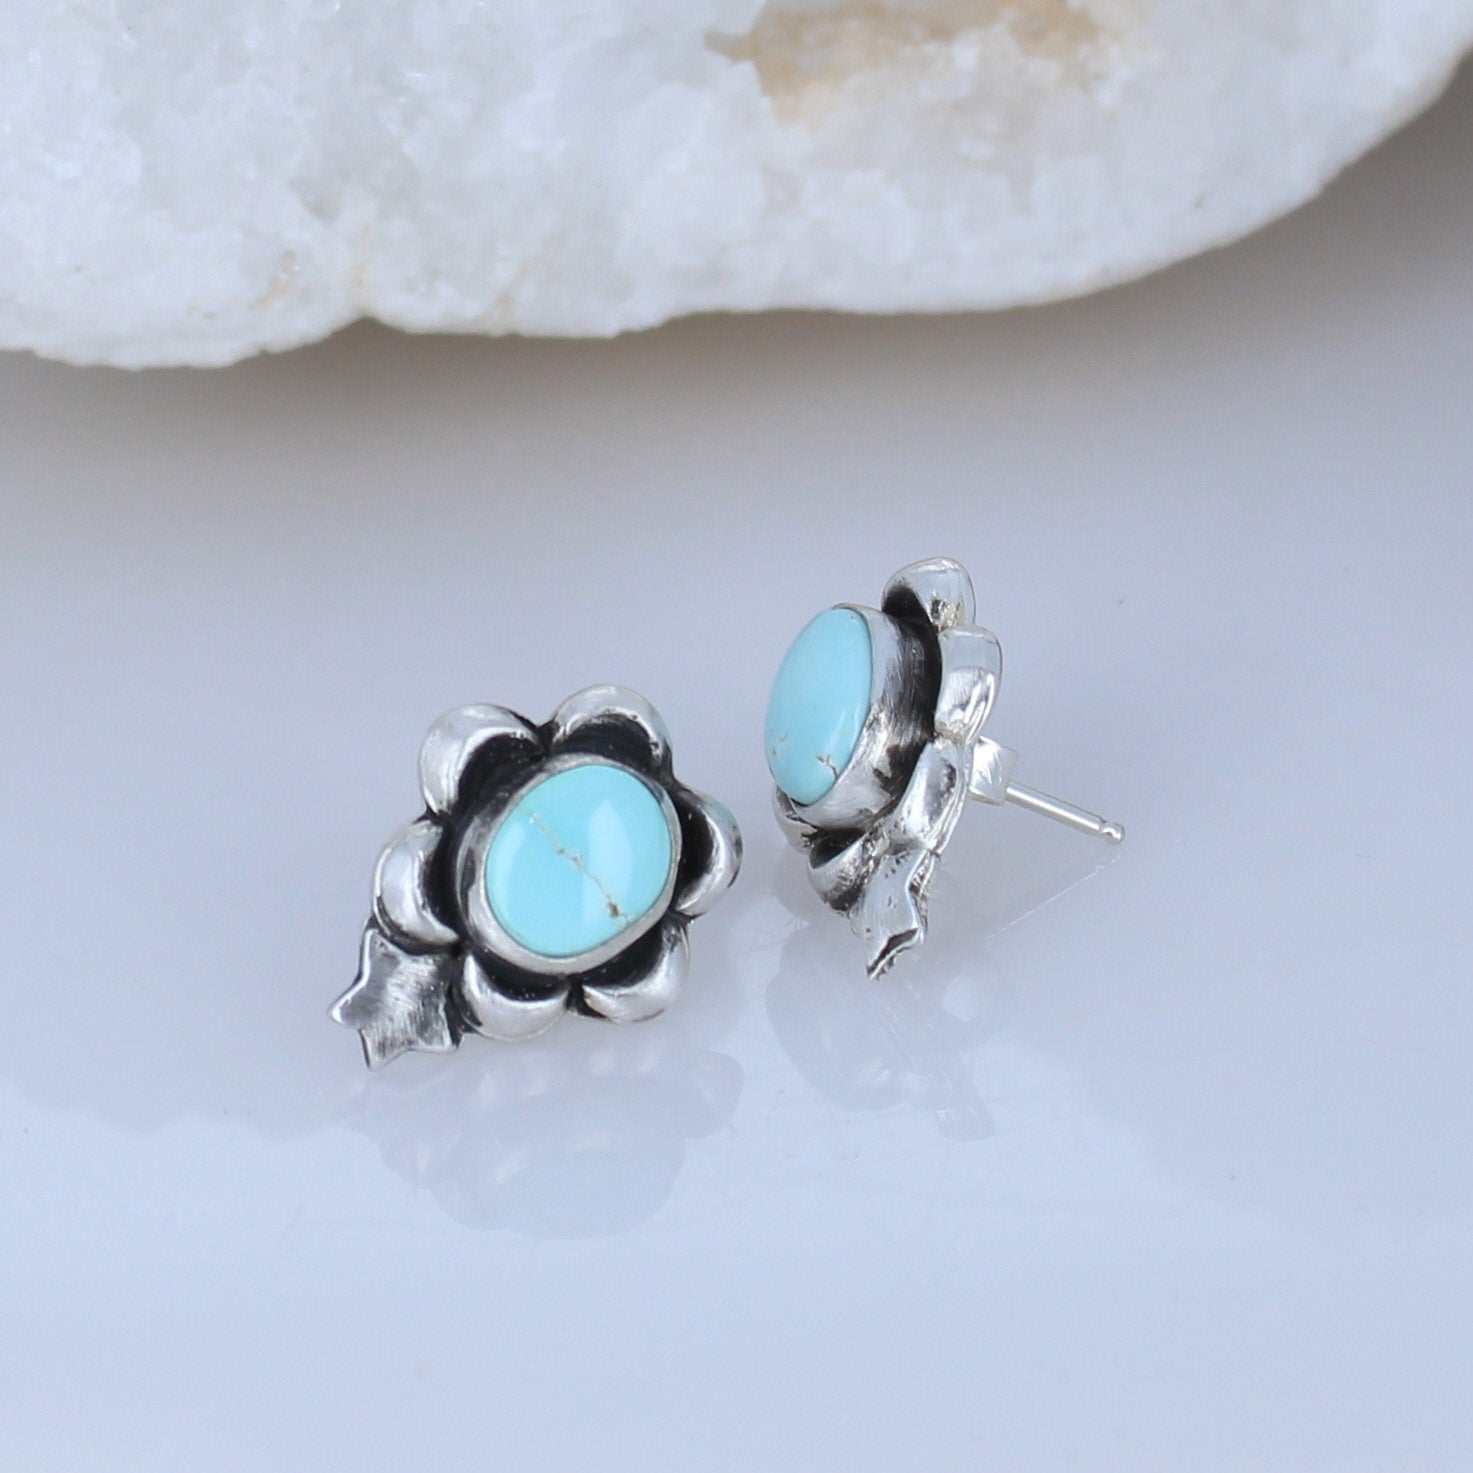 Many Moons Rare Dry Creek Turquoise Earrings Sterling -NewWorldGems